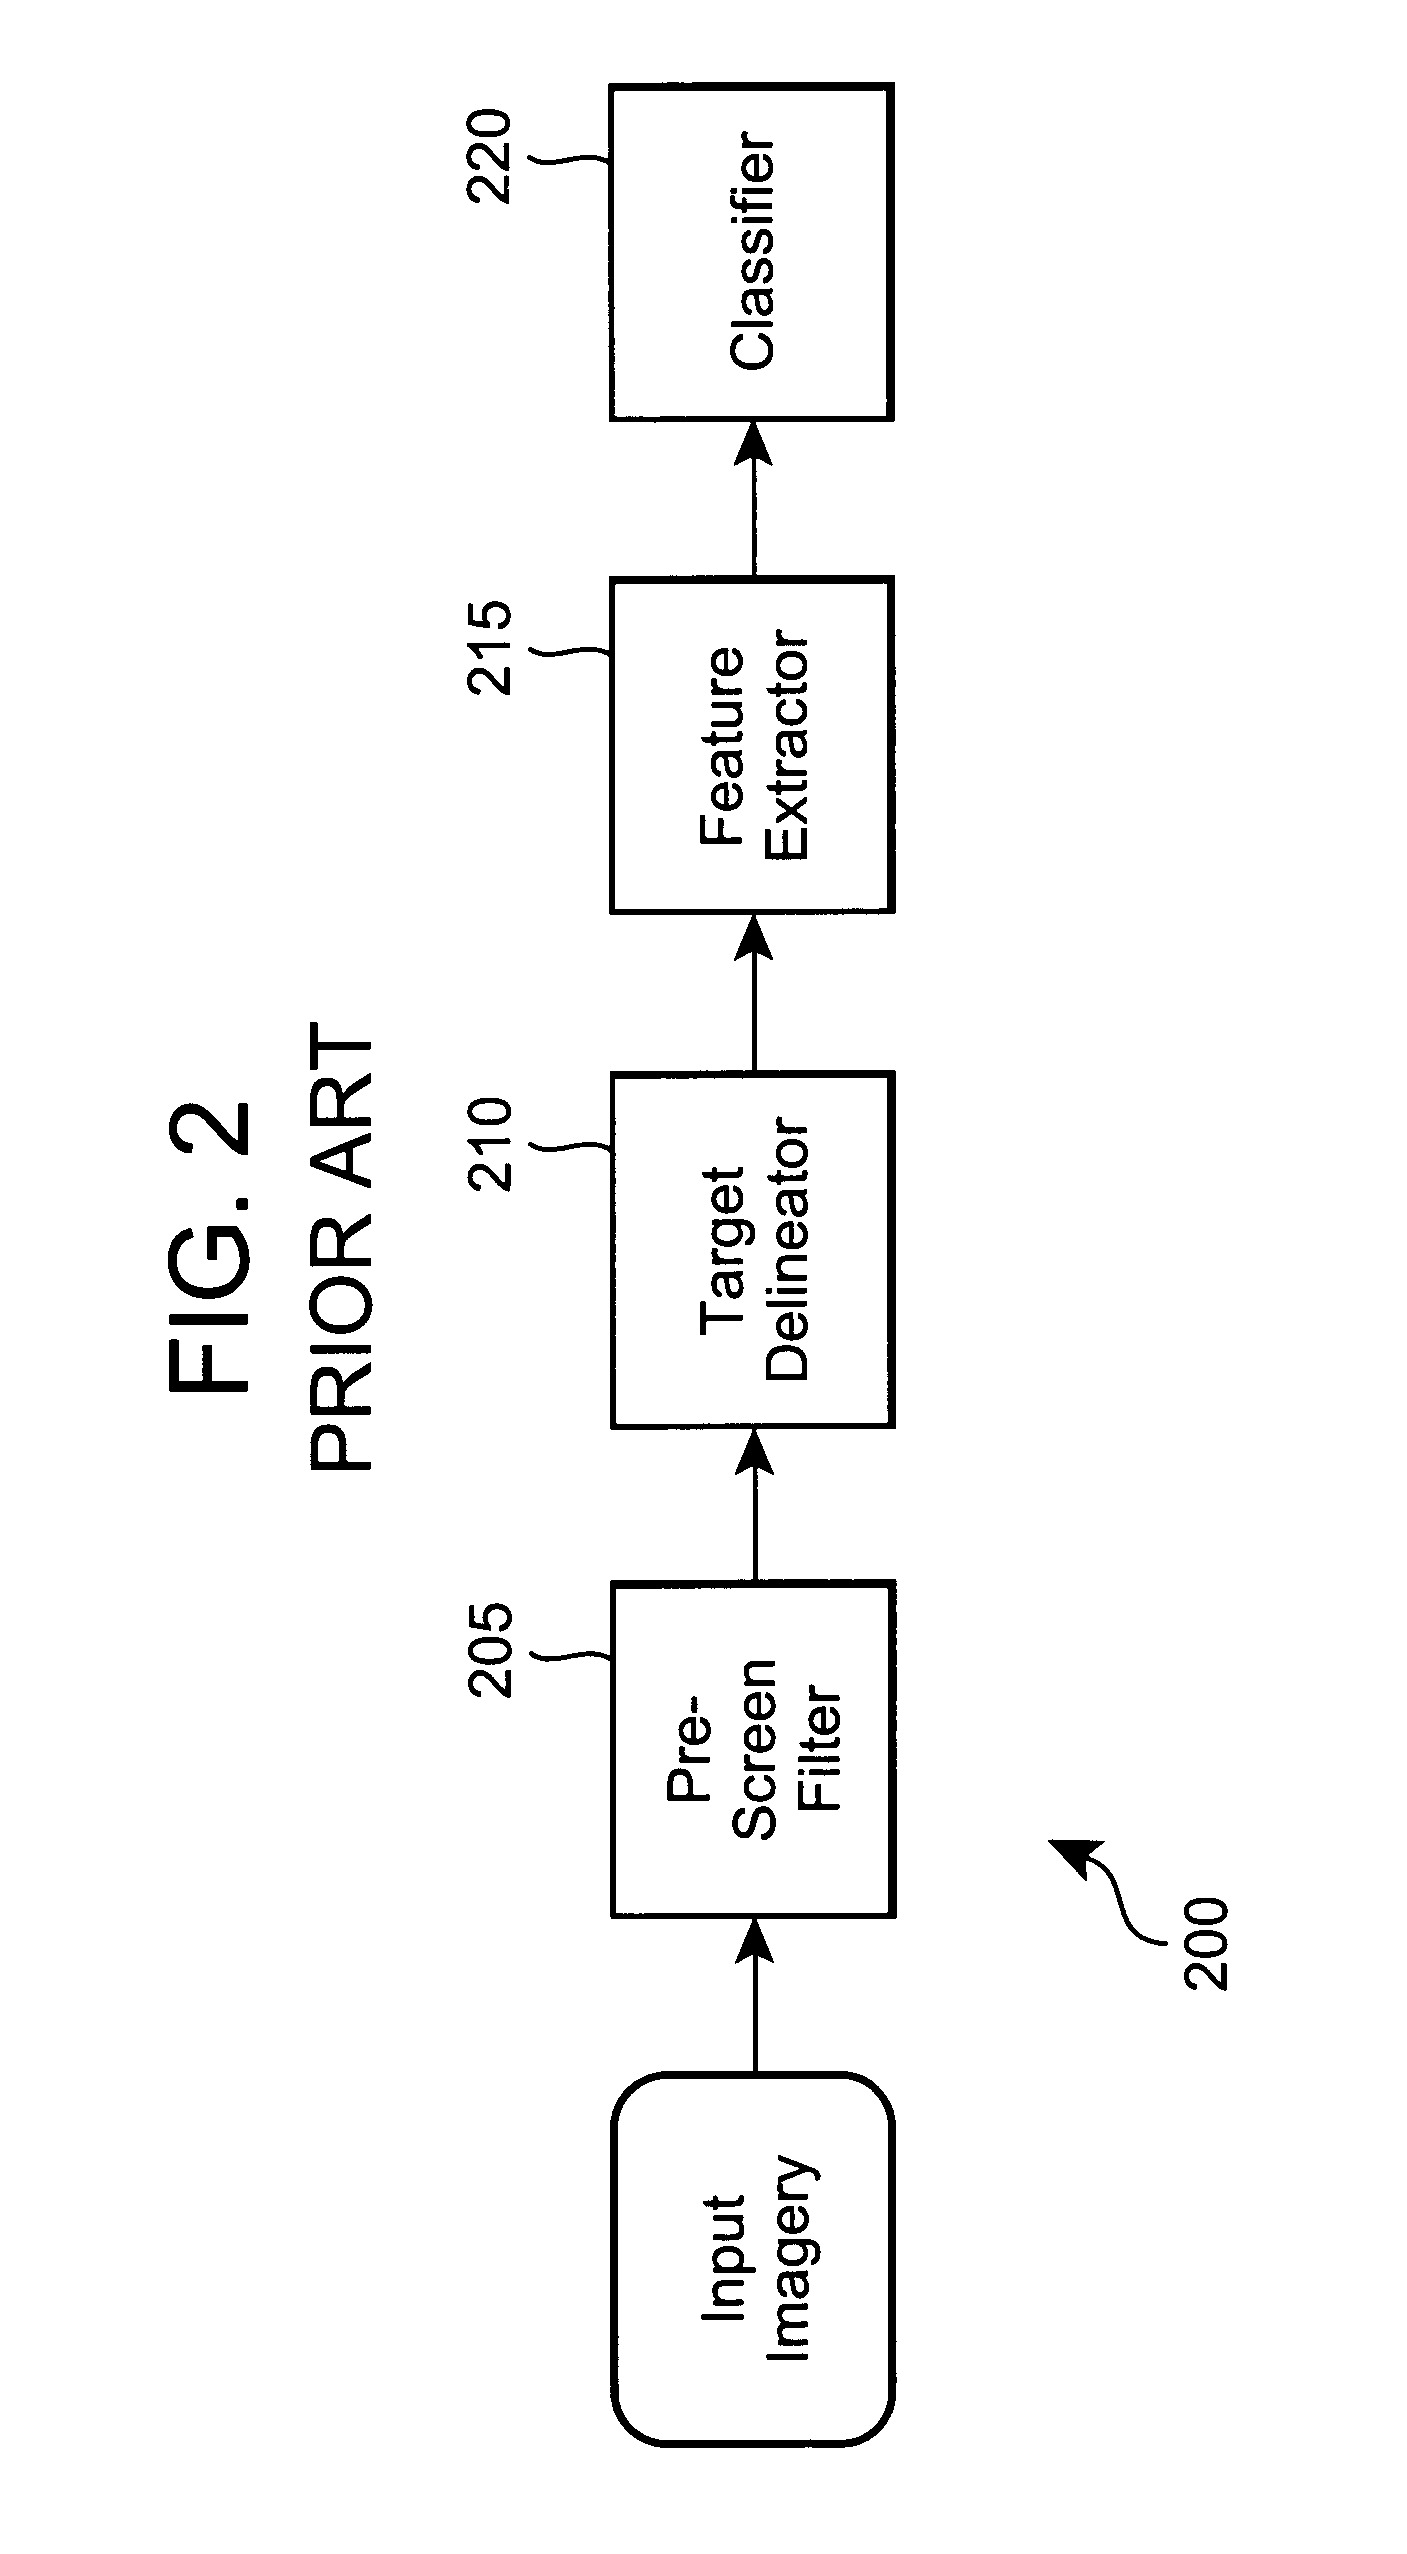 Automatic target recognition system with Elliptical Laplacian Pyramid filter